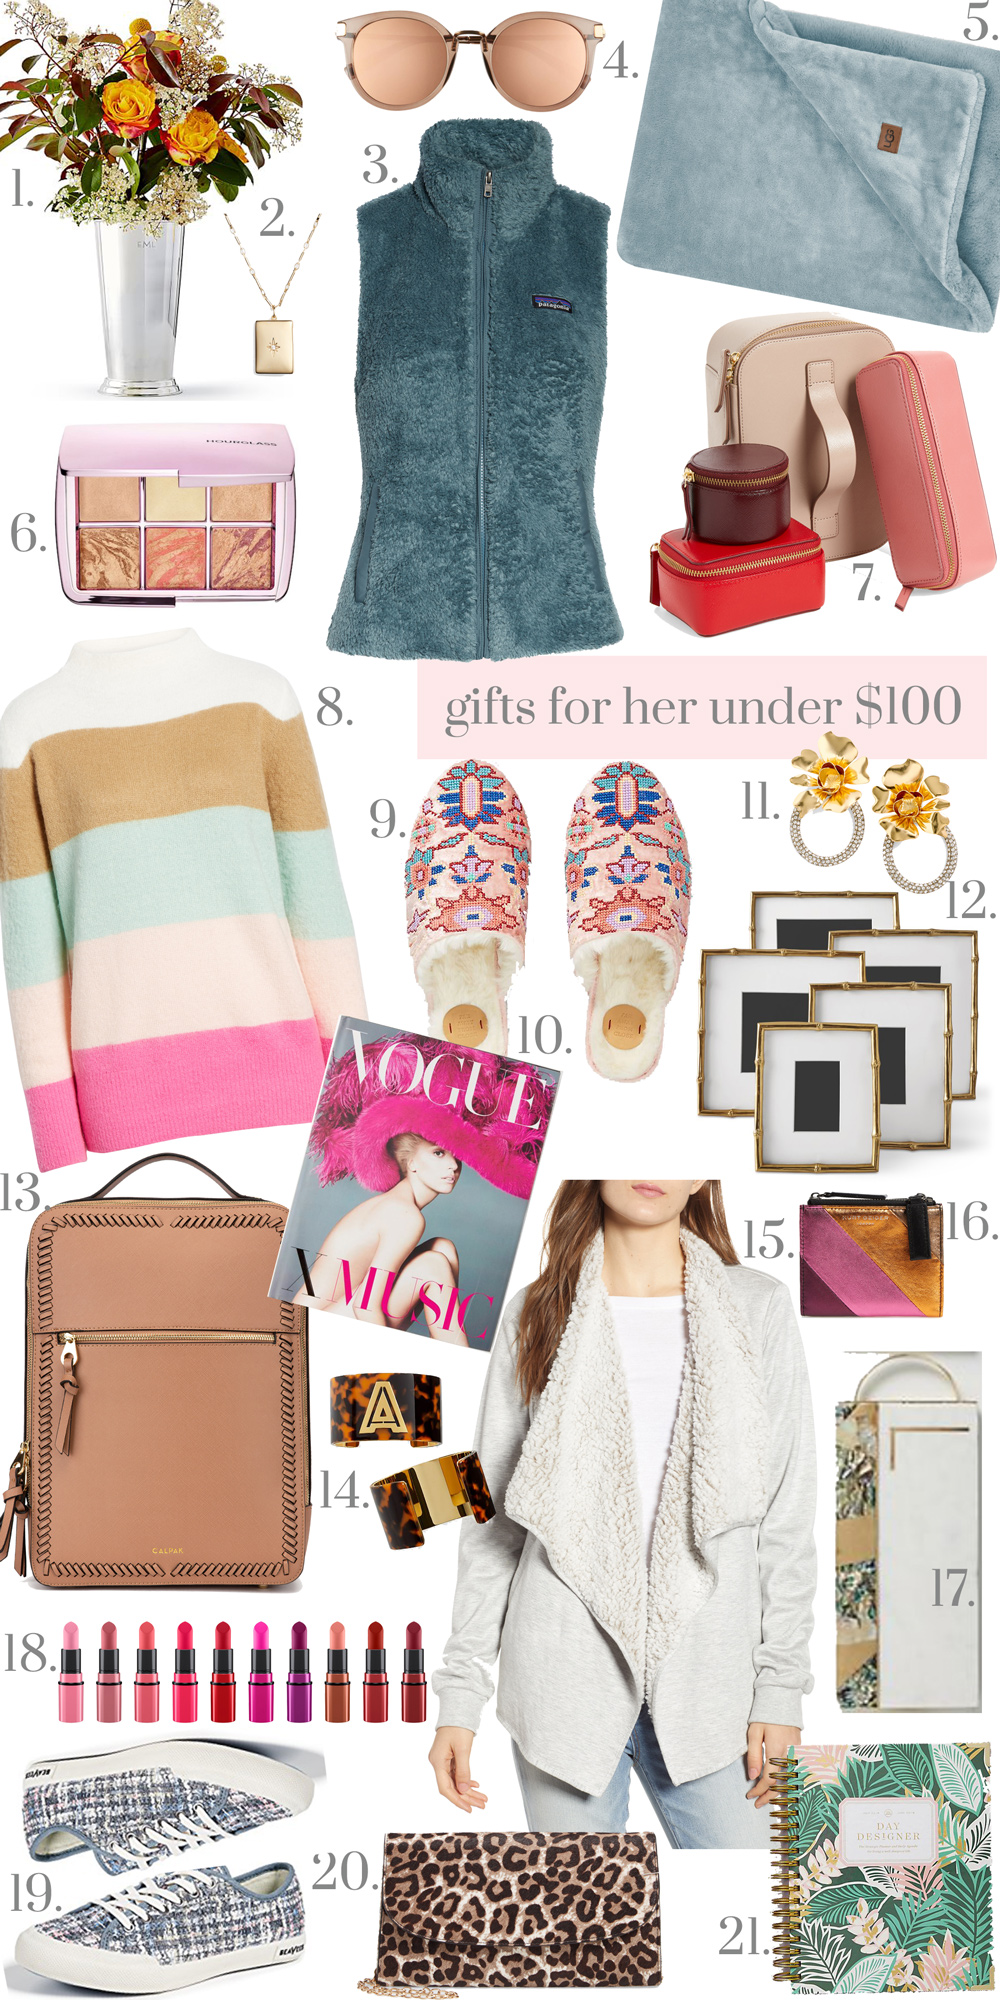 2014 Gift Guide: Gifts Under $100 | A Touch of Teal